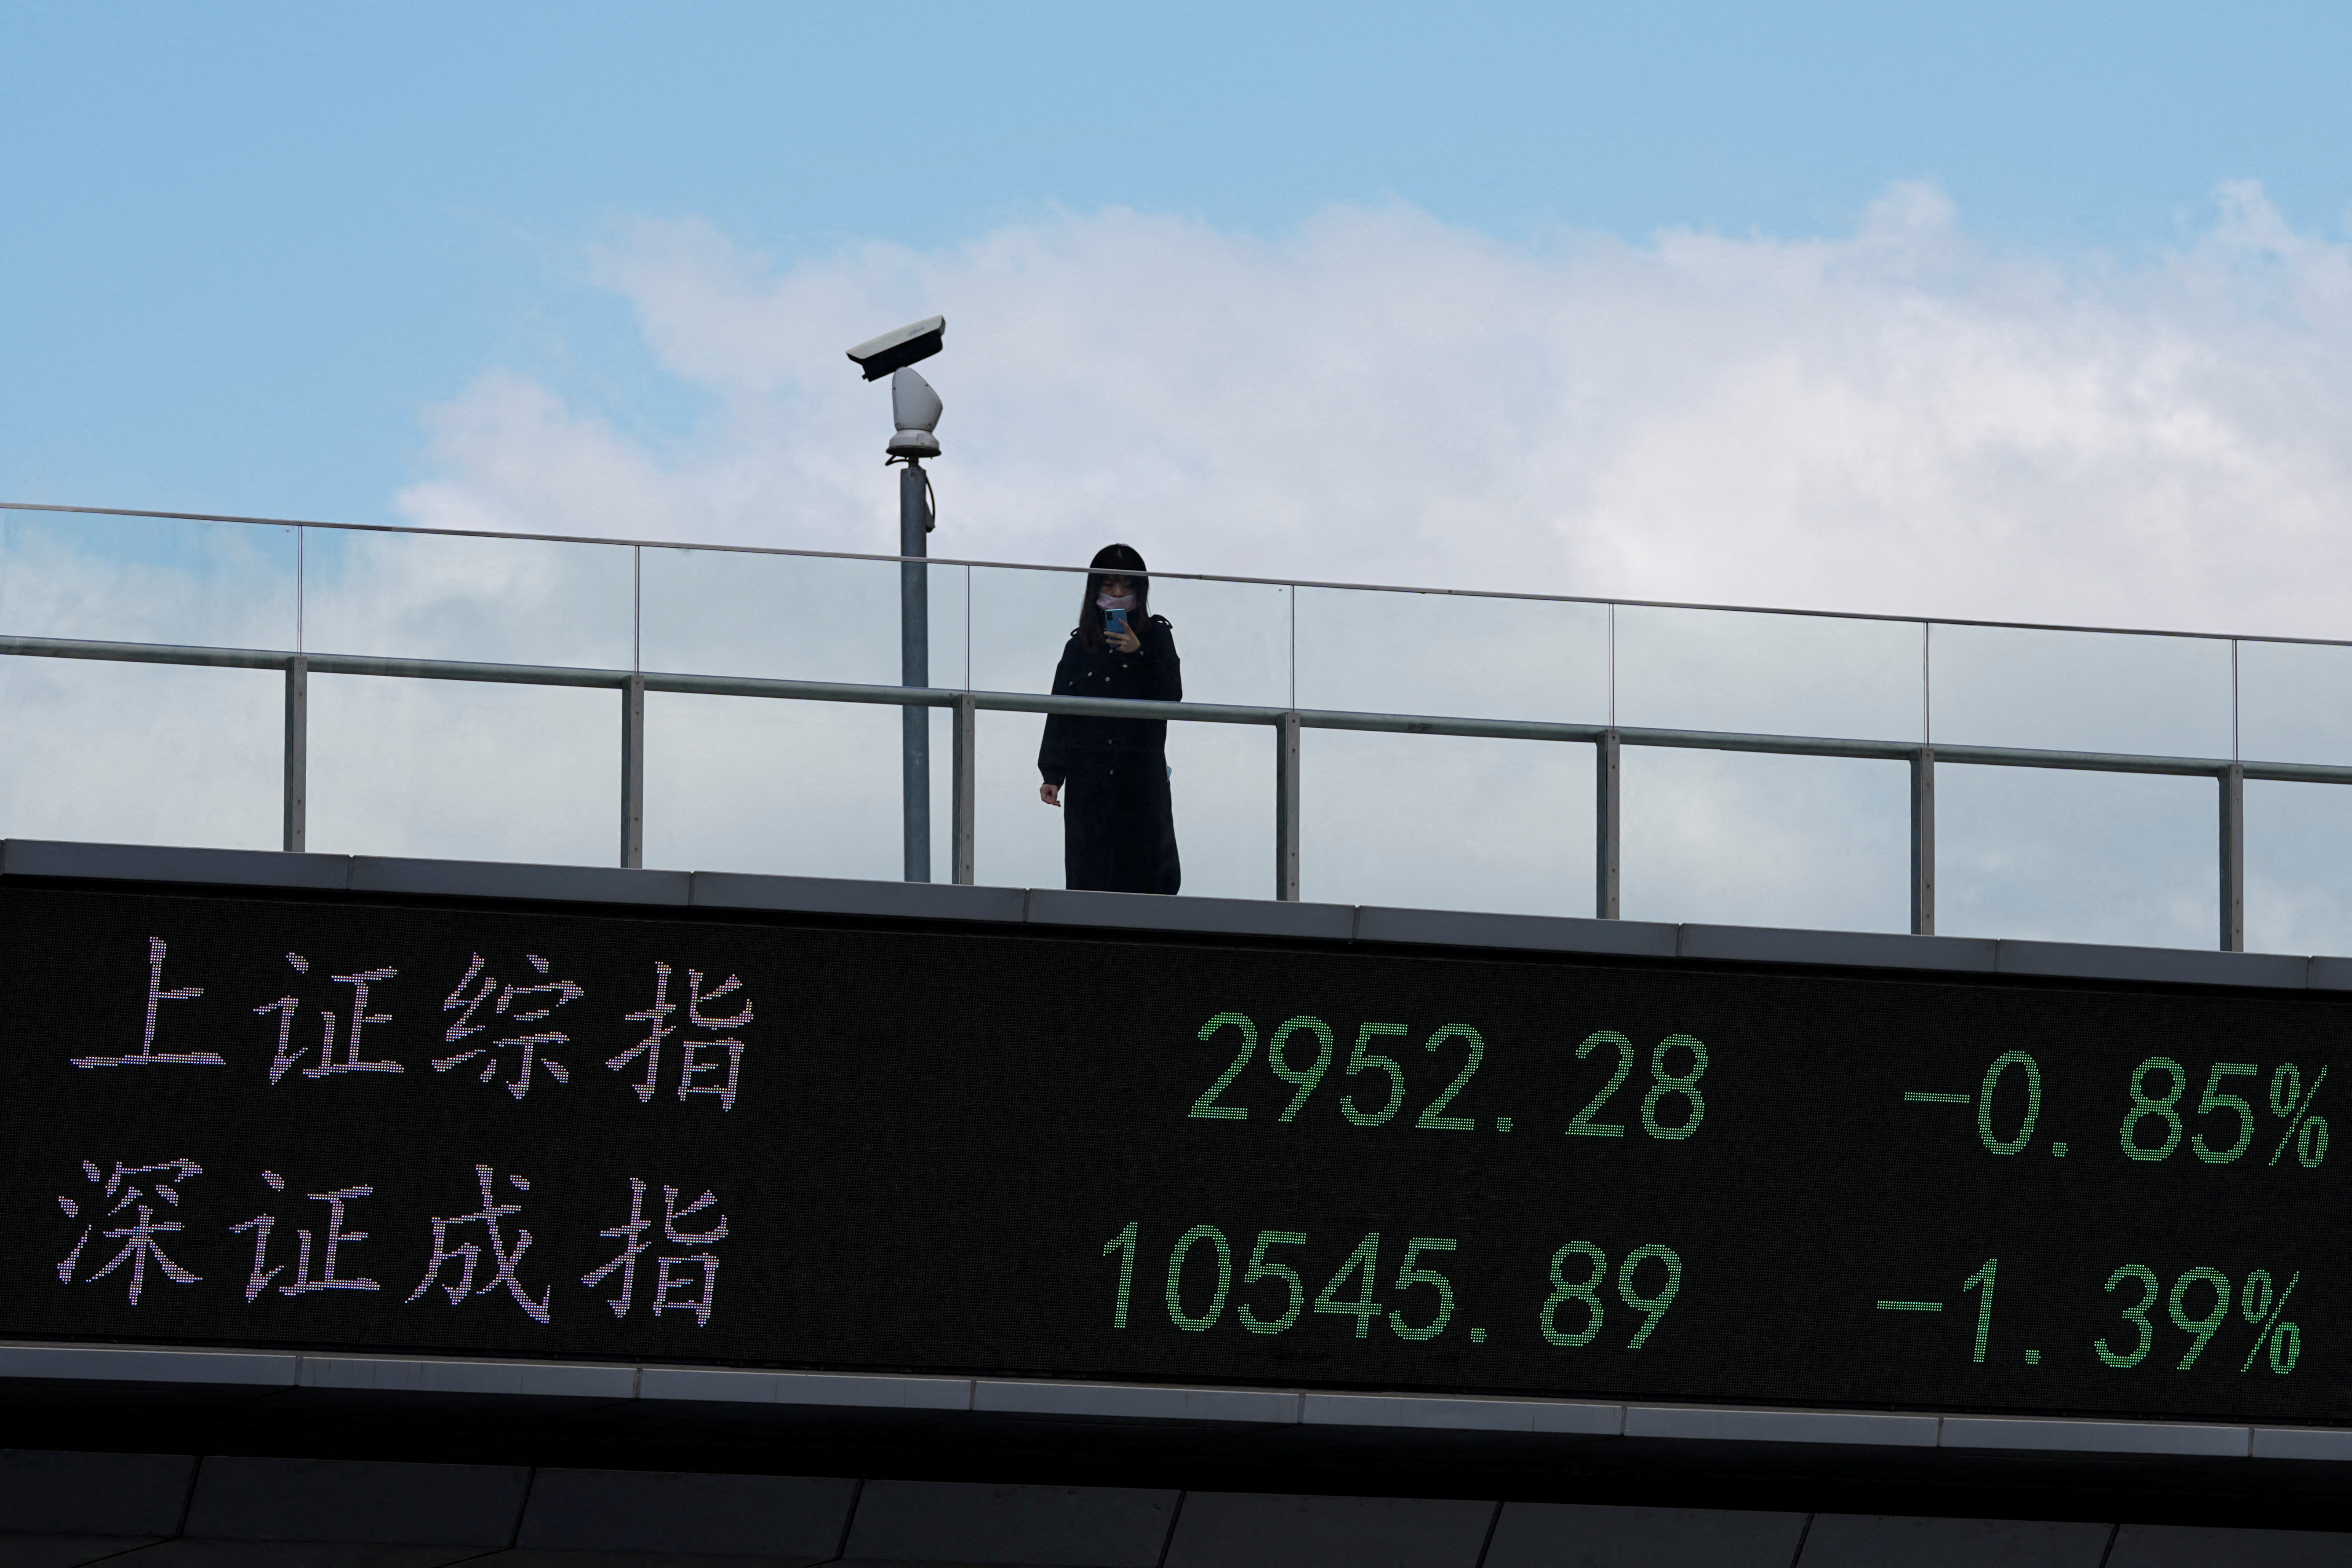 An electronic board shows Shanghai and Shenzhen stock indexes in Shanghai